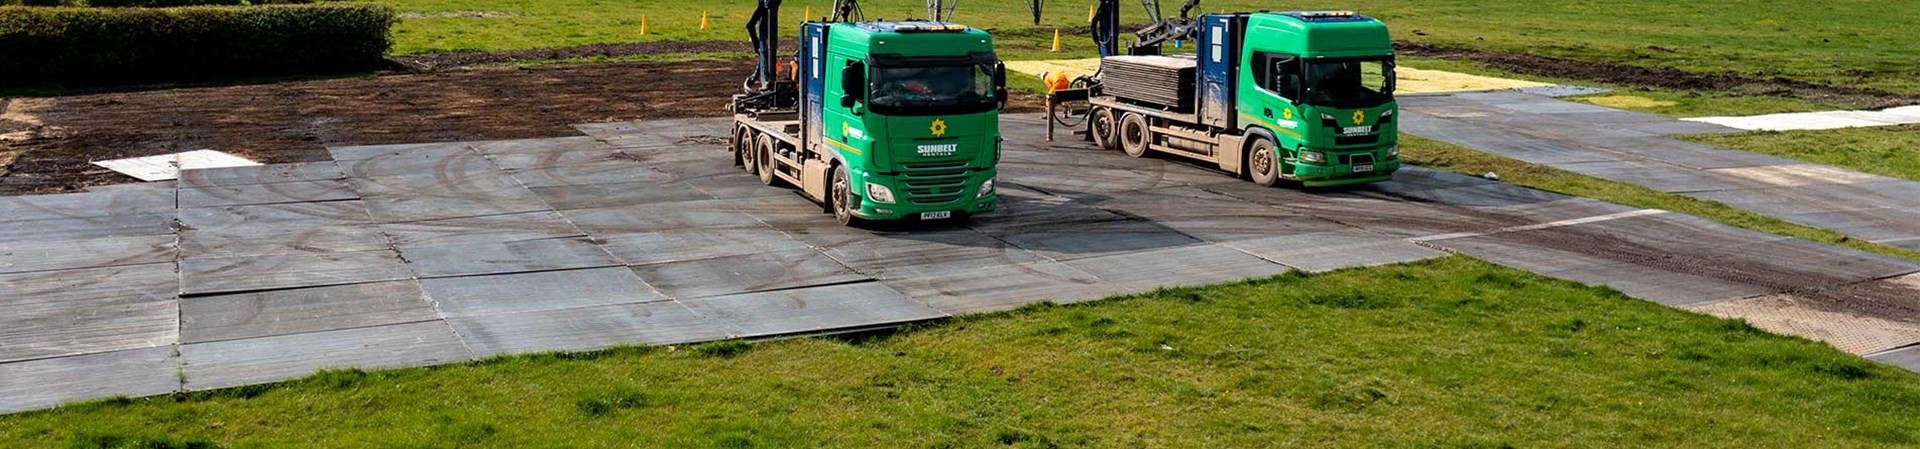 Two Trakway Trucks Laying Down Temporary Trakway On A Field